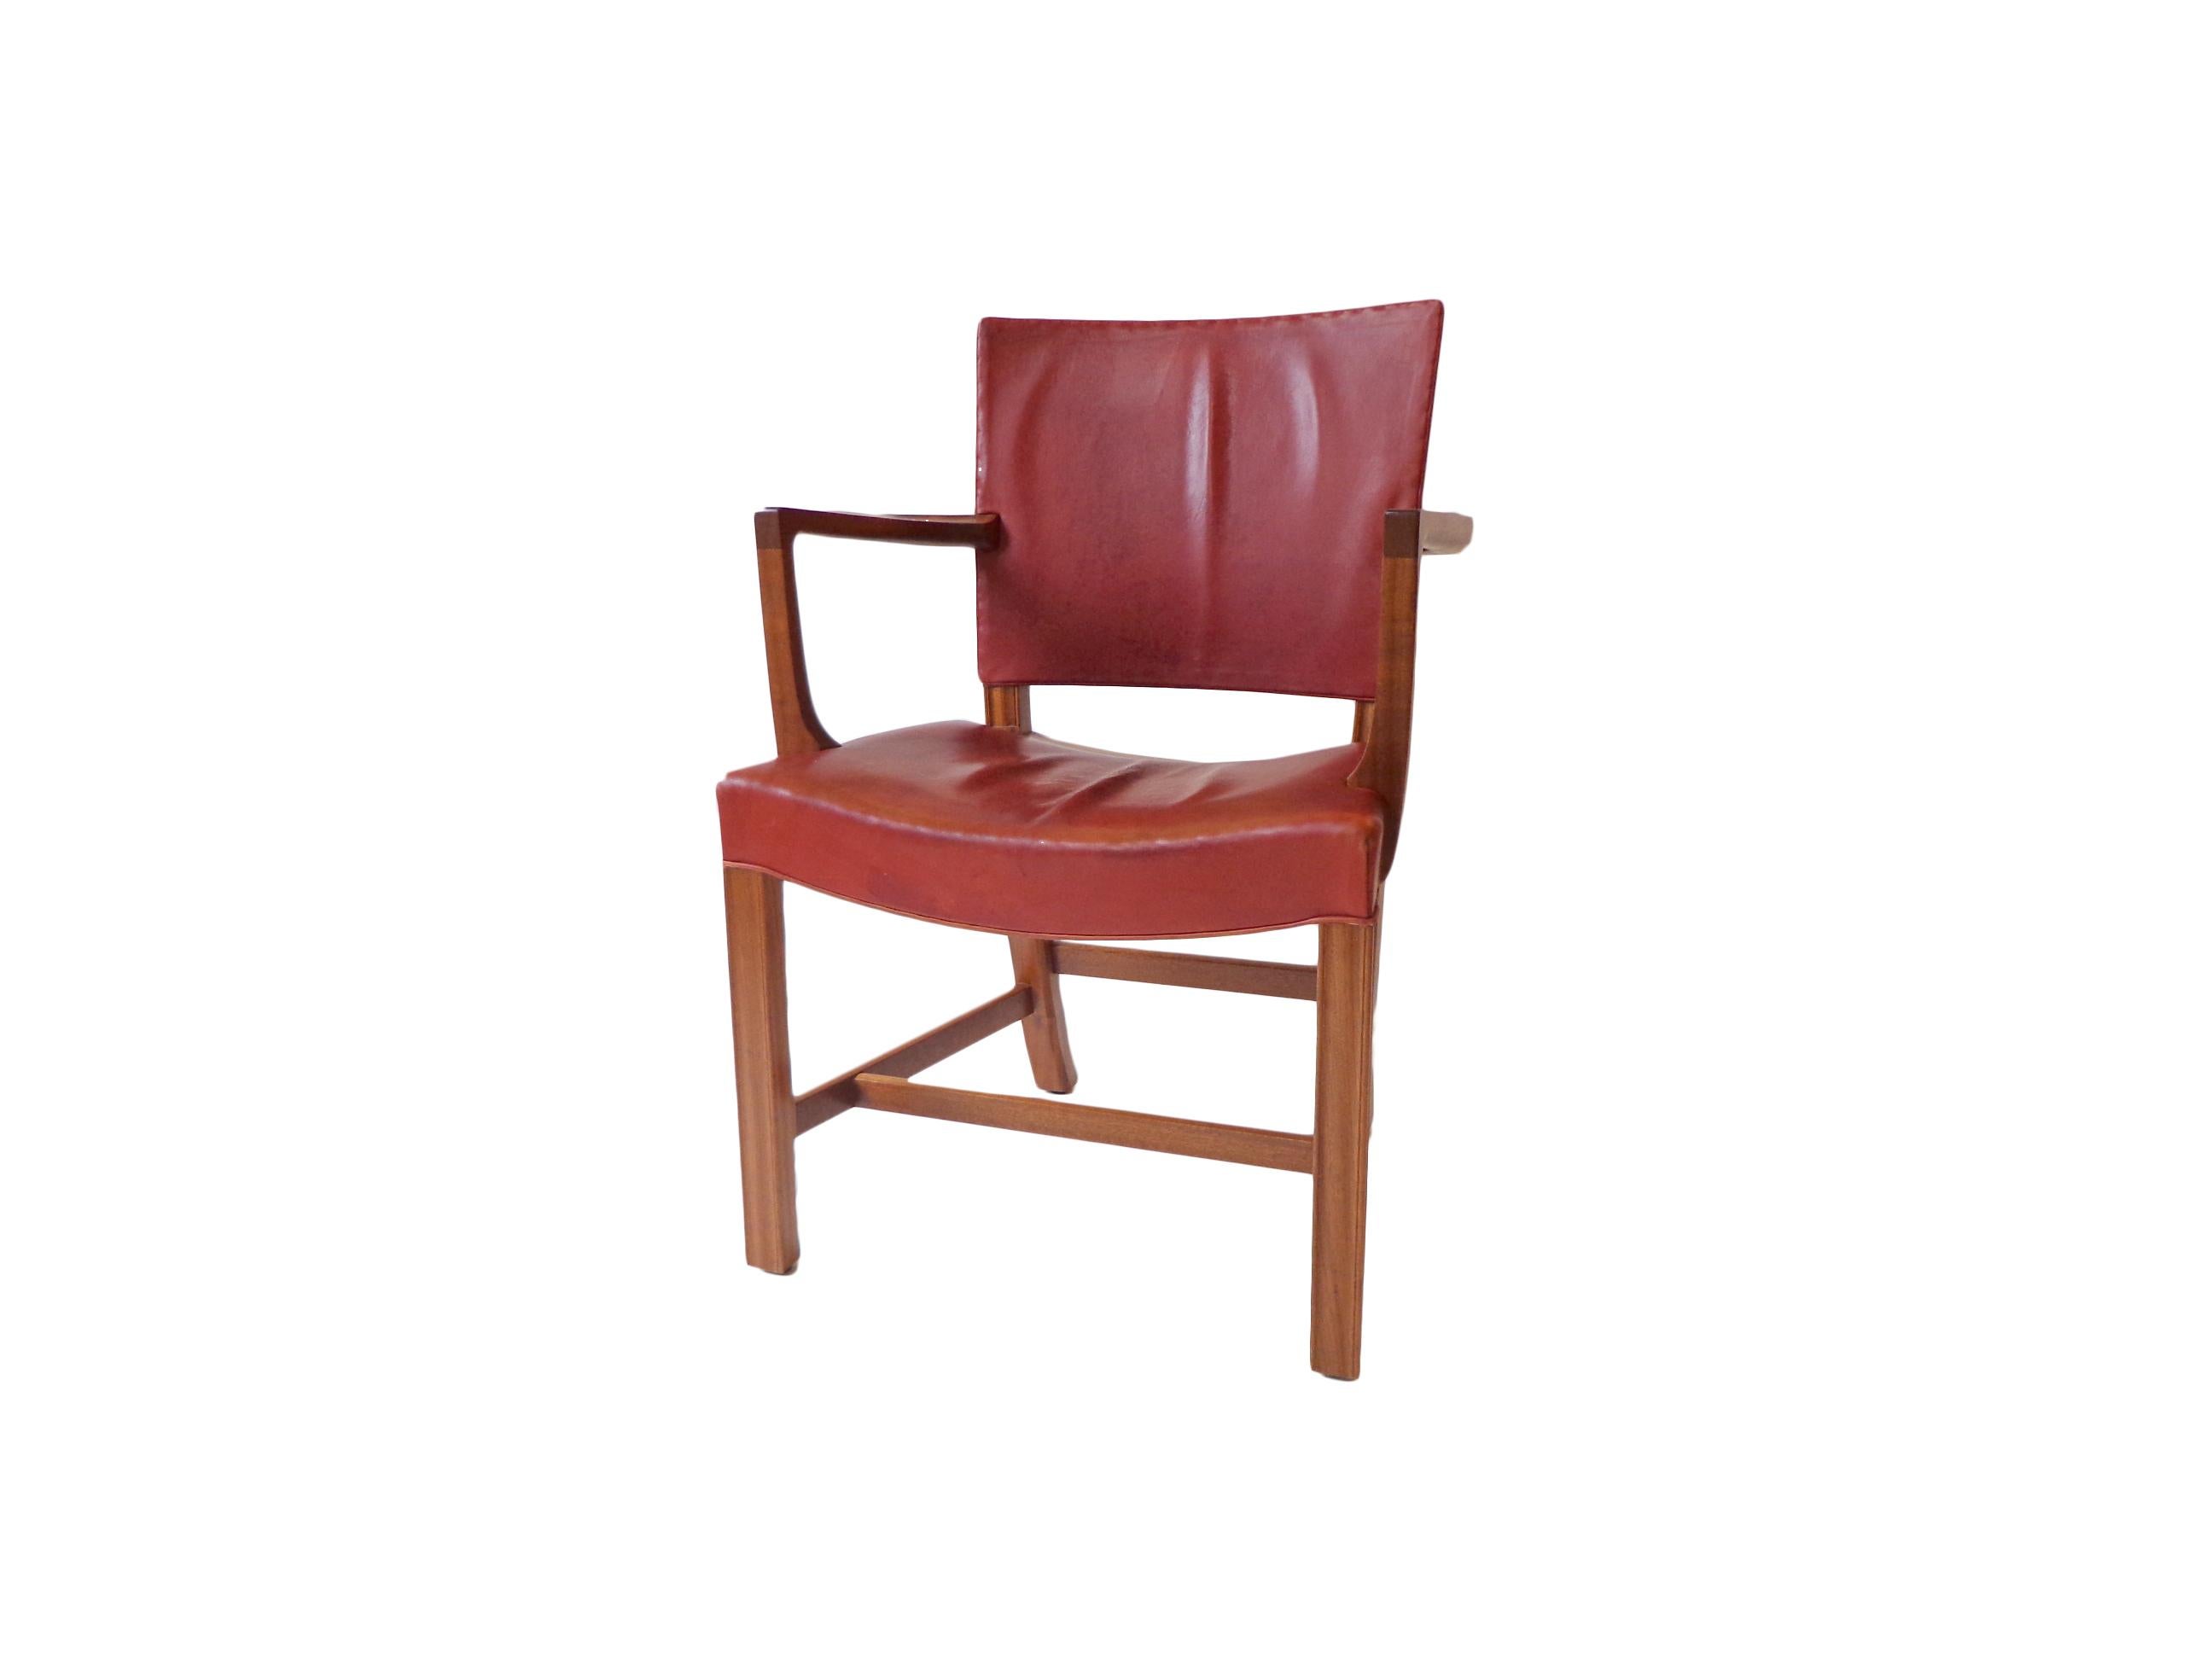 Armchair model 3758 A in original red indian leather and mahogany base. Model designed in 1927 for the Danish Museum of Decorative Art, produced by Rud Rasmussen in the 1940’s. Signed with manufacturer’s label to underside: (Rud. Rasmussens